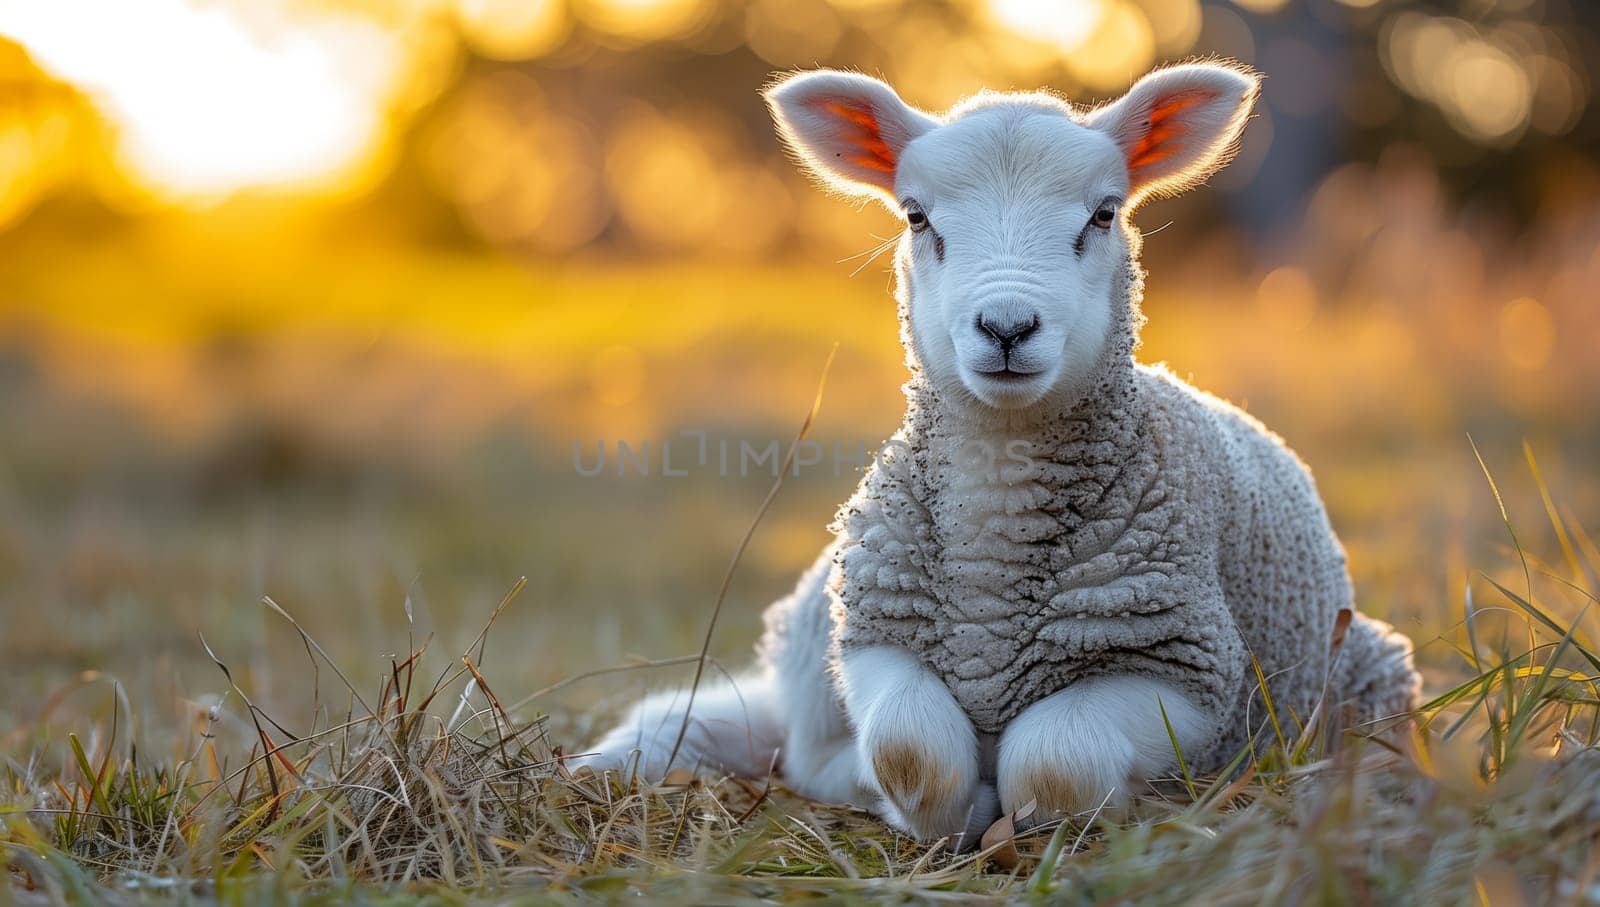 A fawn lamb rests on the grass, gazing at the camera in a natural landscape by richwolf